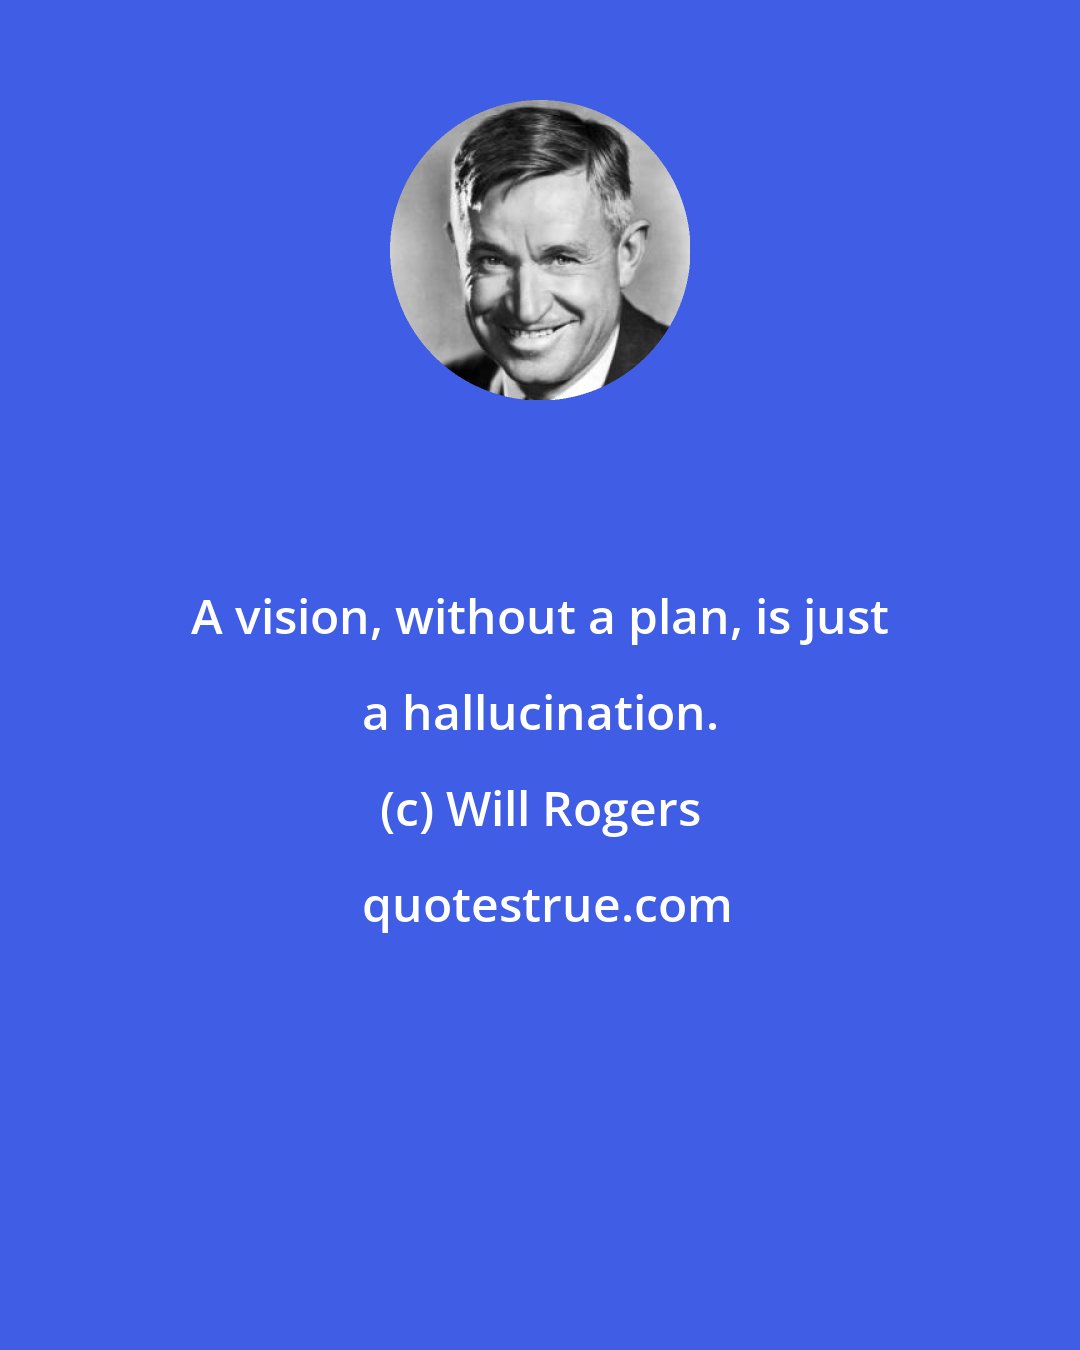 Will Rogers: A vision, without a plan, is just a hallucination.